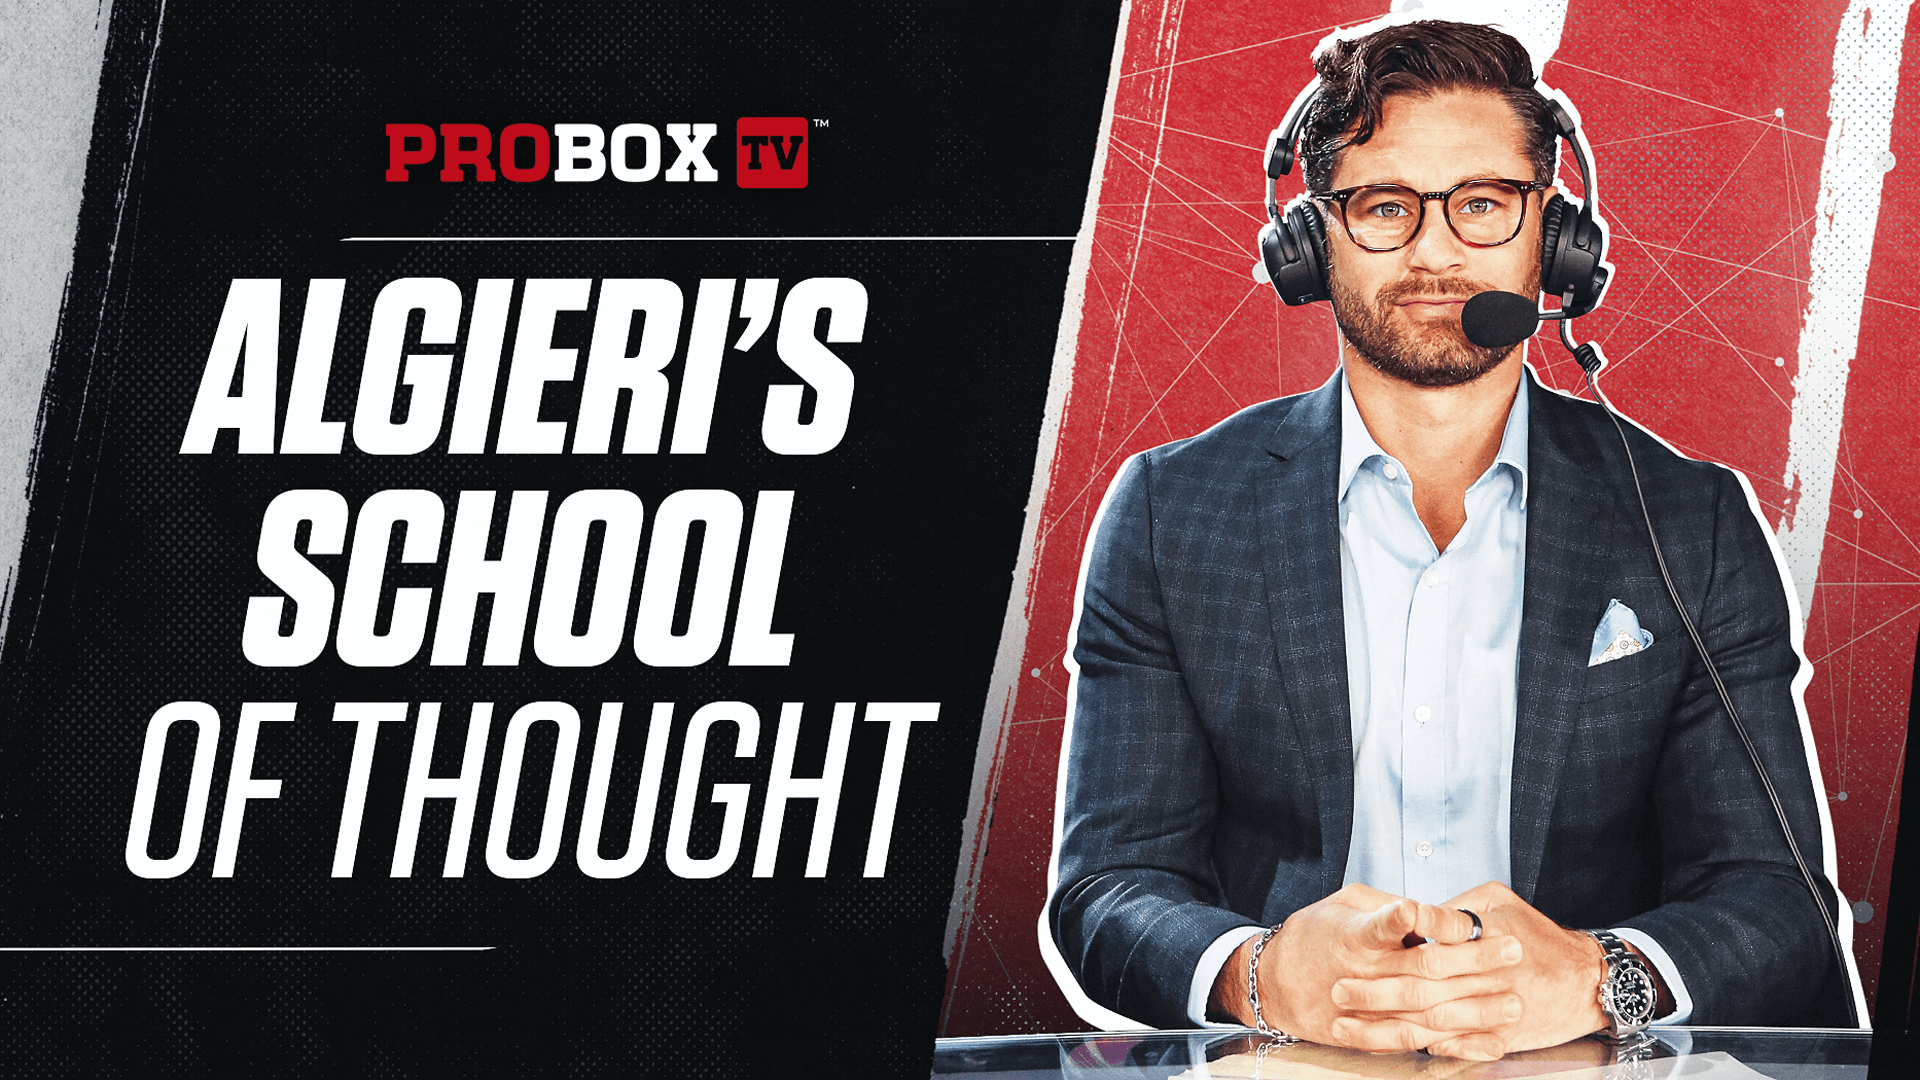 Chris Algieri's School of Thought: Dubois' punch looked legal, but that doesn't mean he deserves a rematch